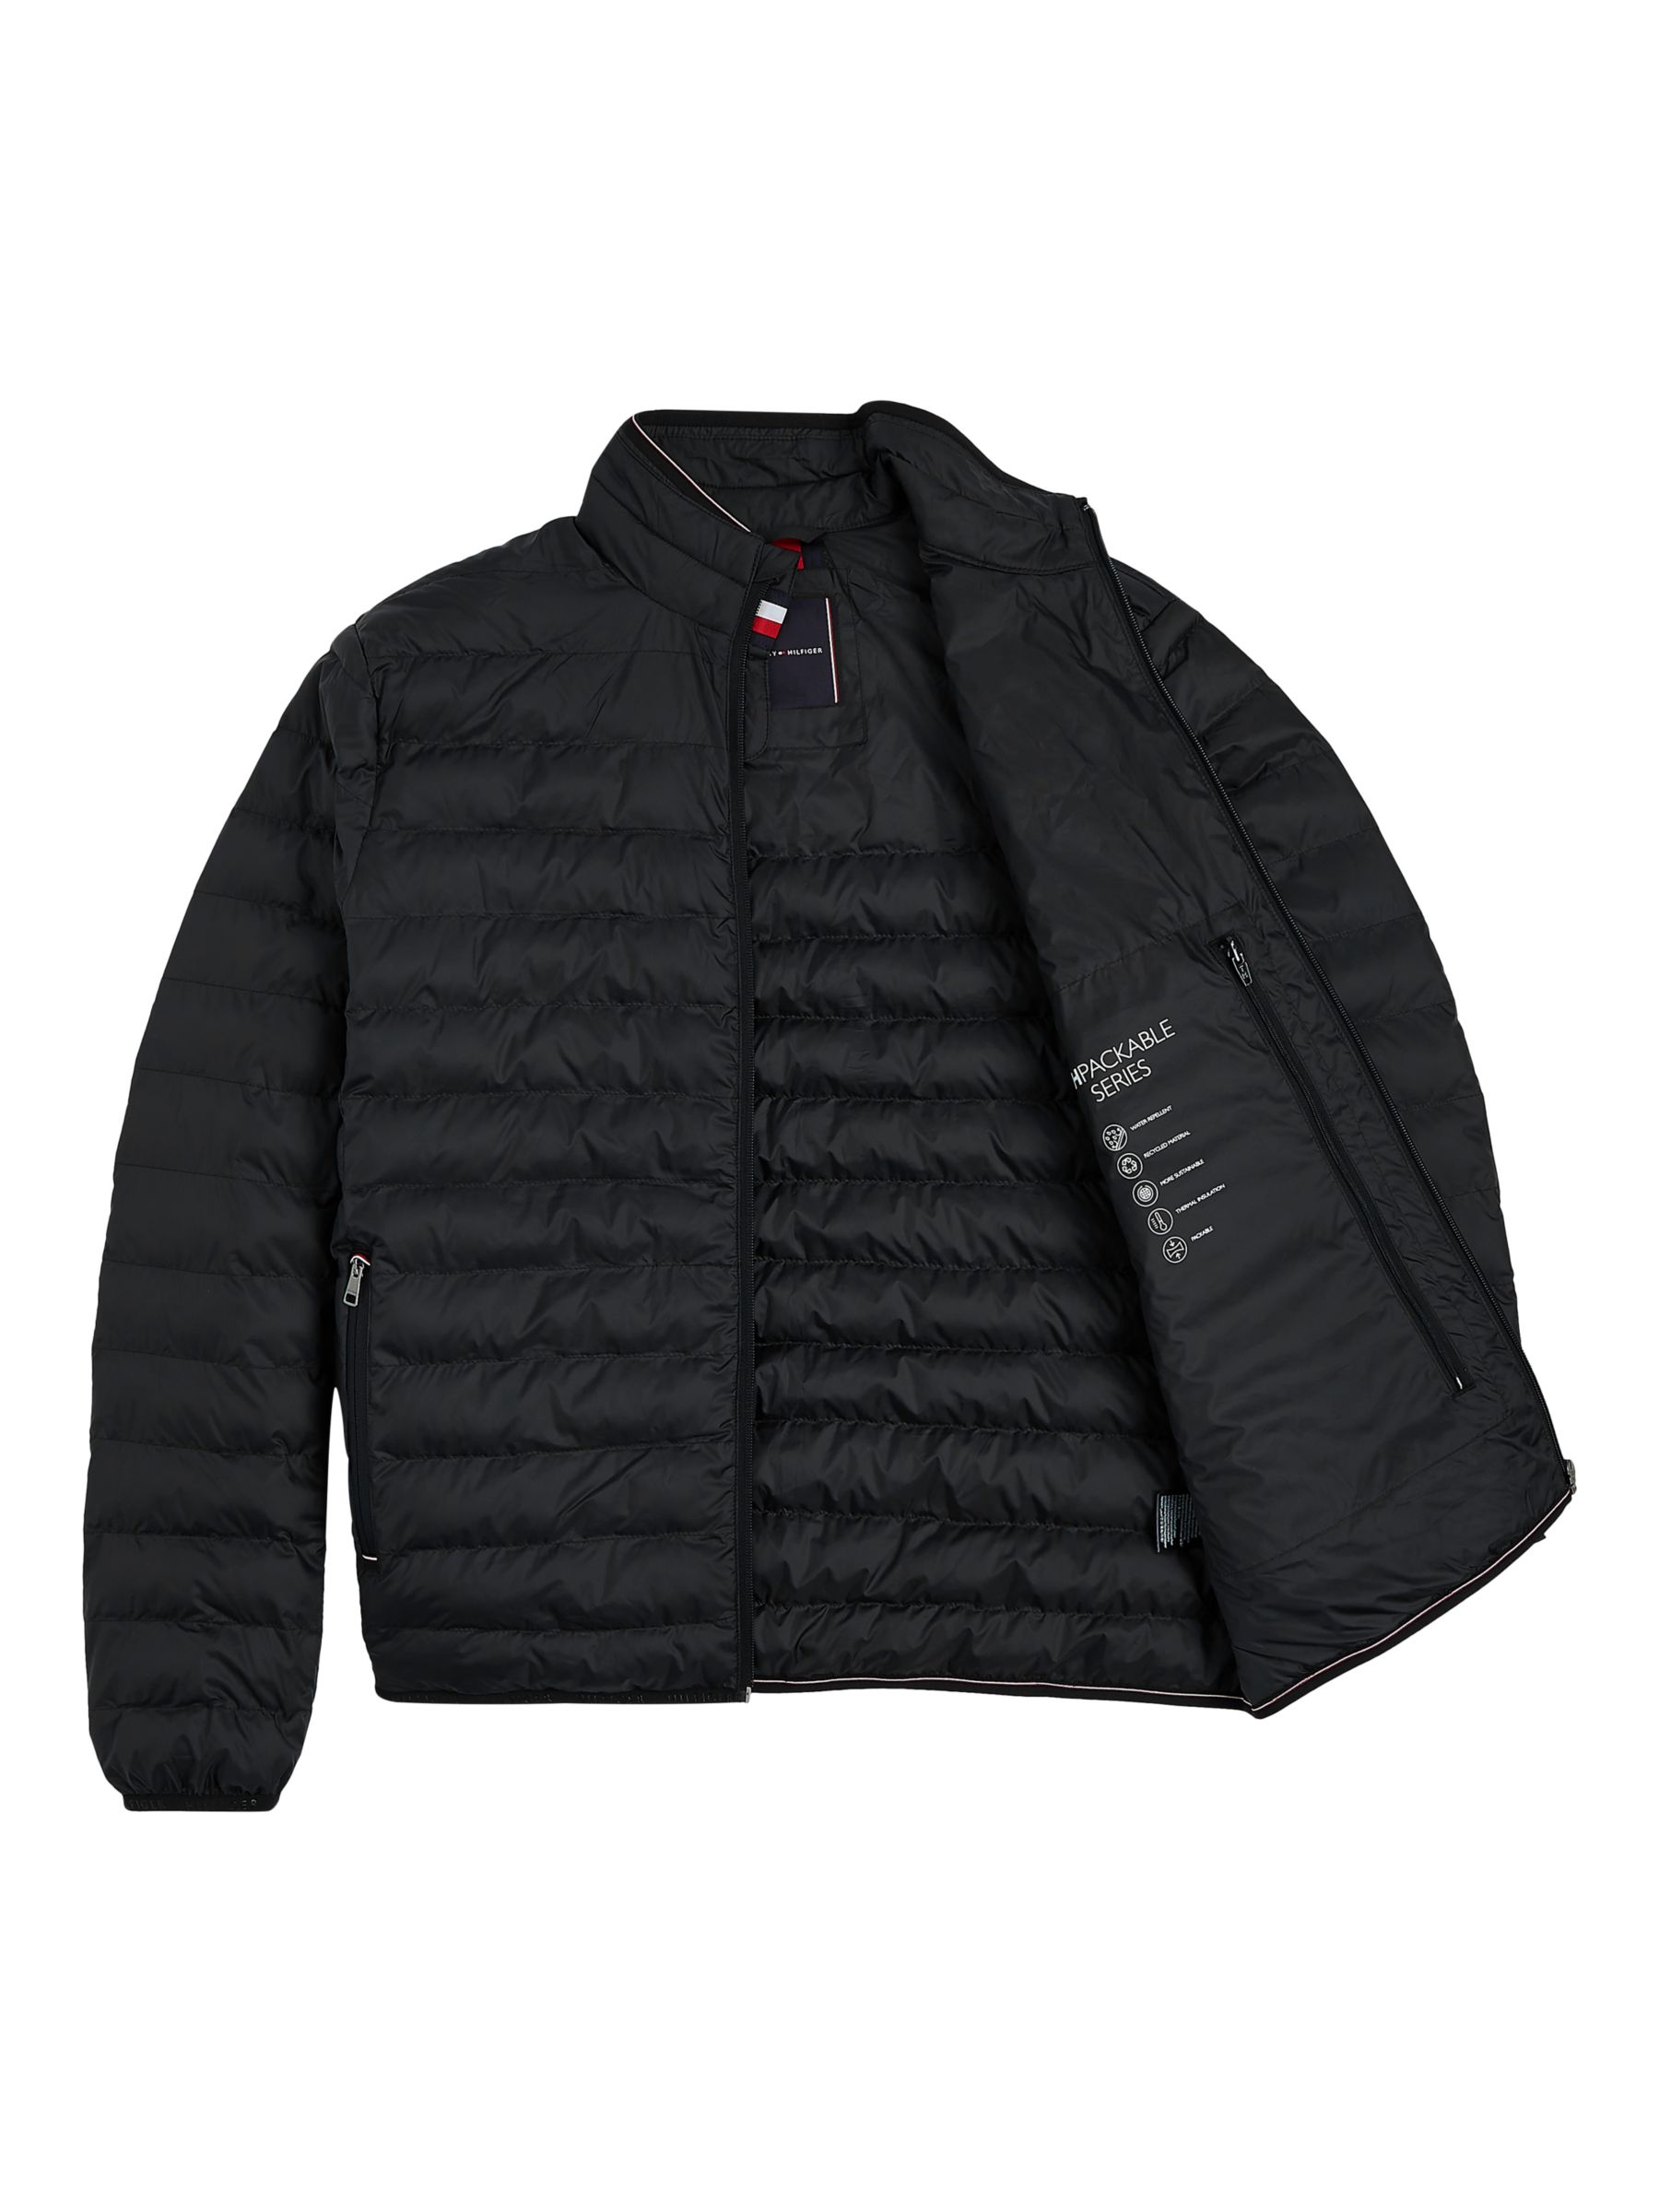 Buy Tommy Hilfiger Packable Down Quilted Jacket Online at johnlewis.com